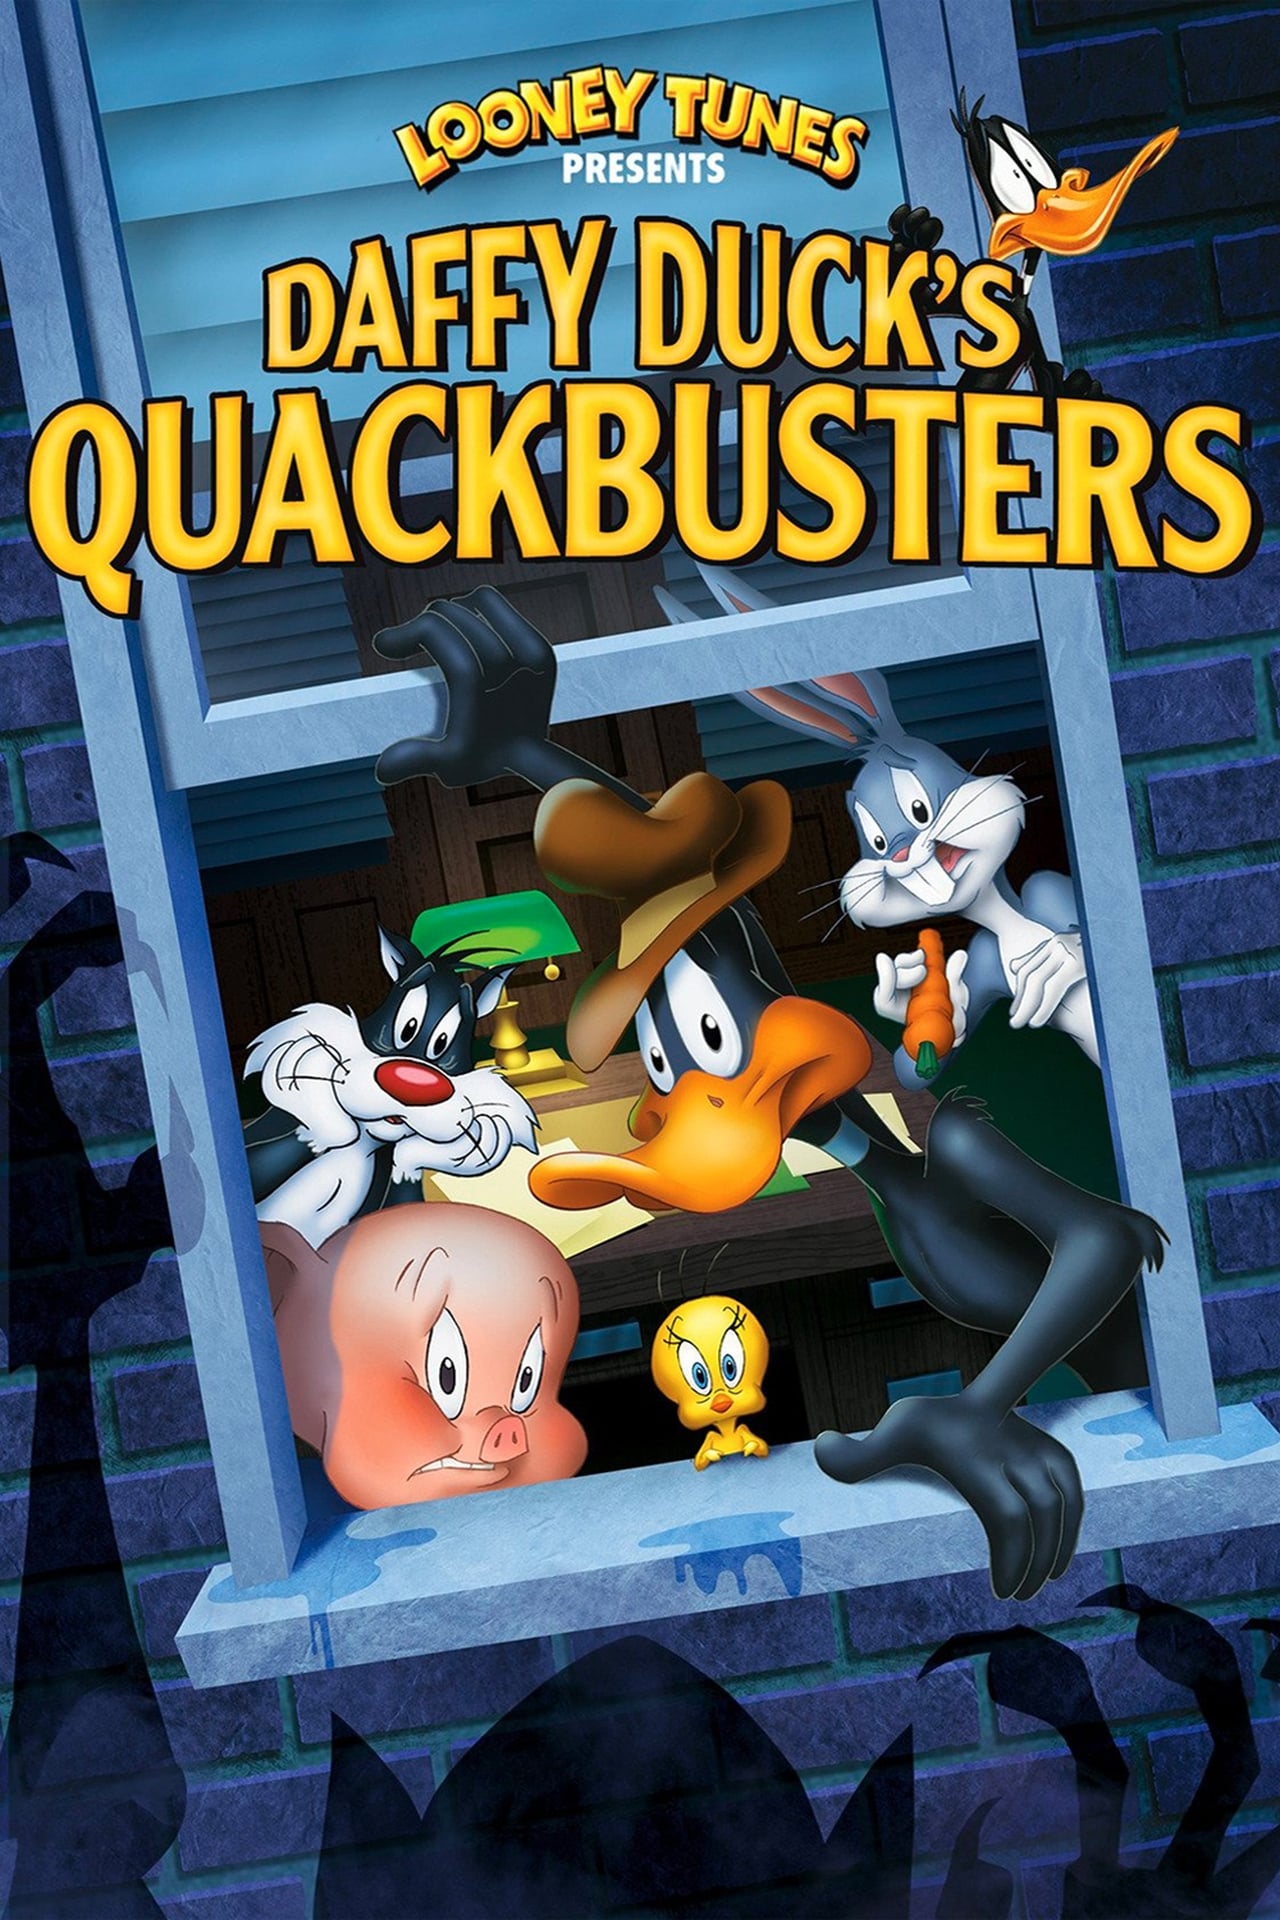 Daffy Duck's Quackbusters wiki, synopsis, reviews, watch and download
